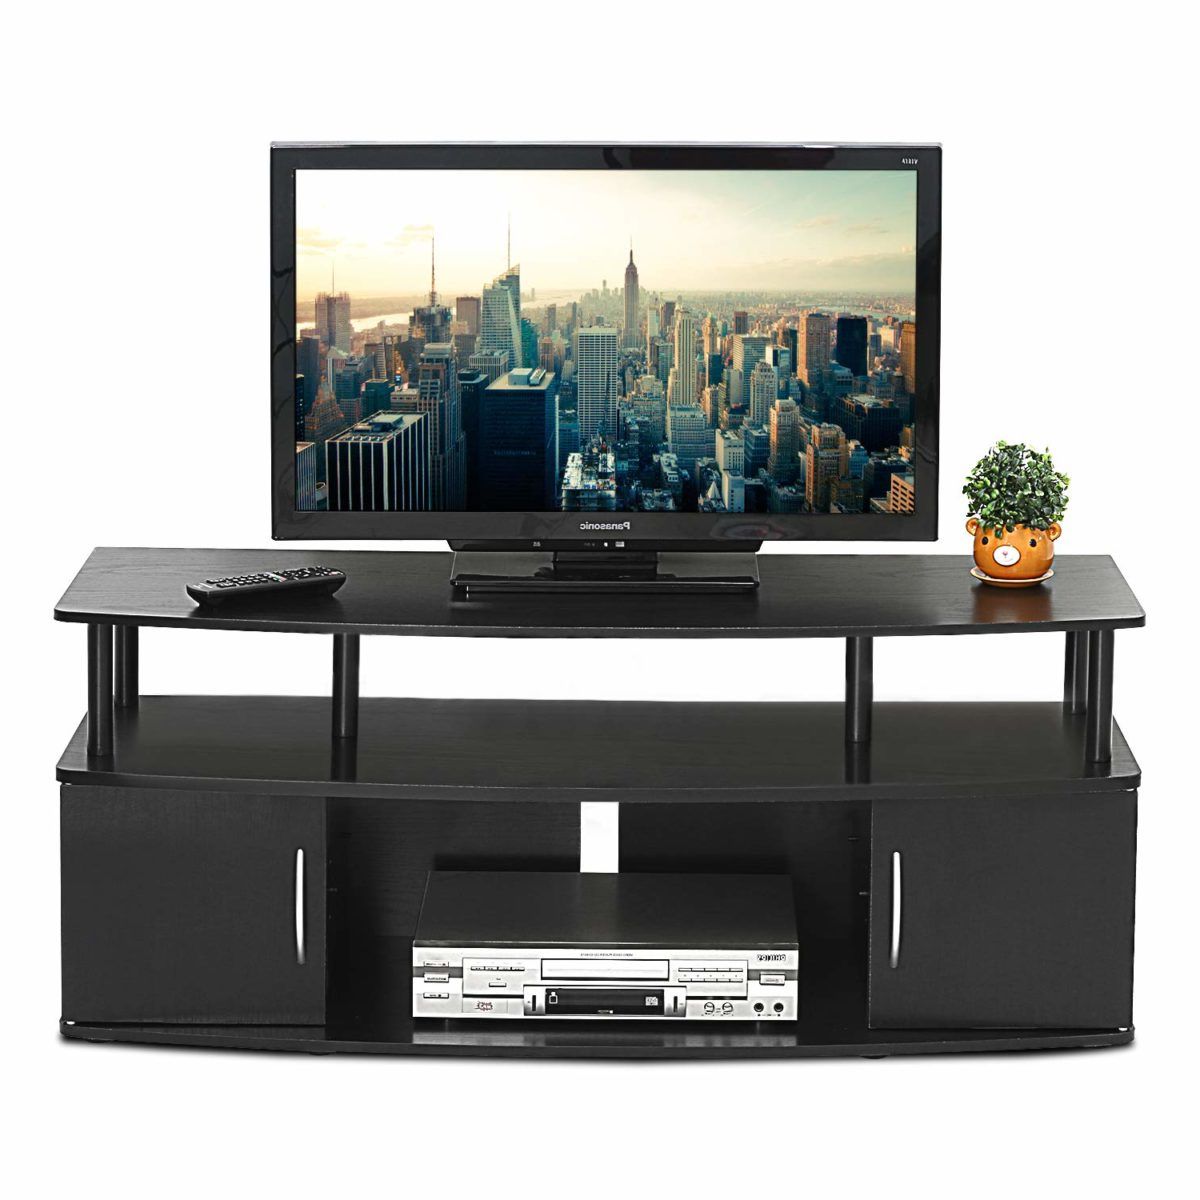 Jaya Large Entertainment Center Hold Up To 50 In Tv $50.15 Pertaining To Furinno Jaya Large Tv Stands With Storage Bin (Gallery 11 of 20)